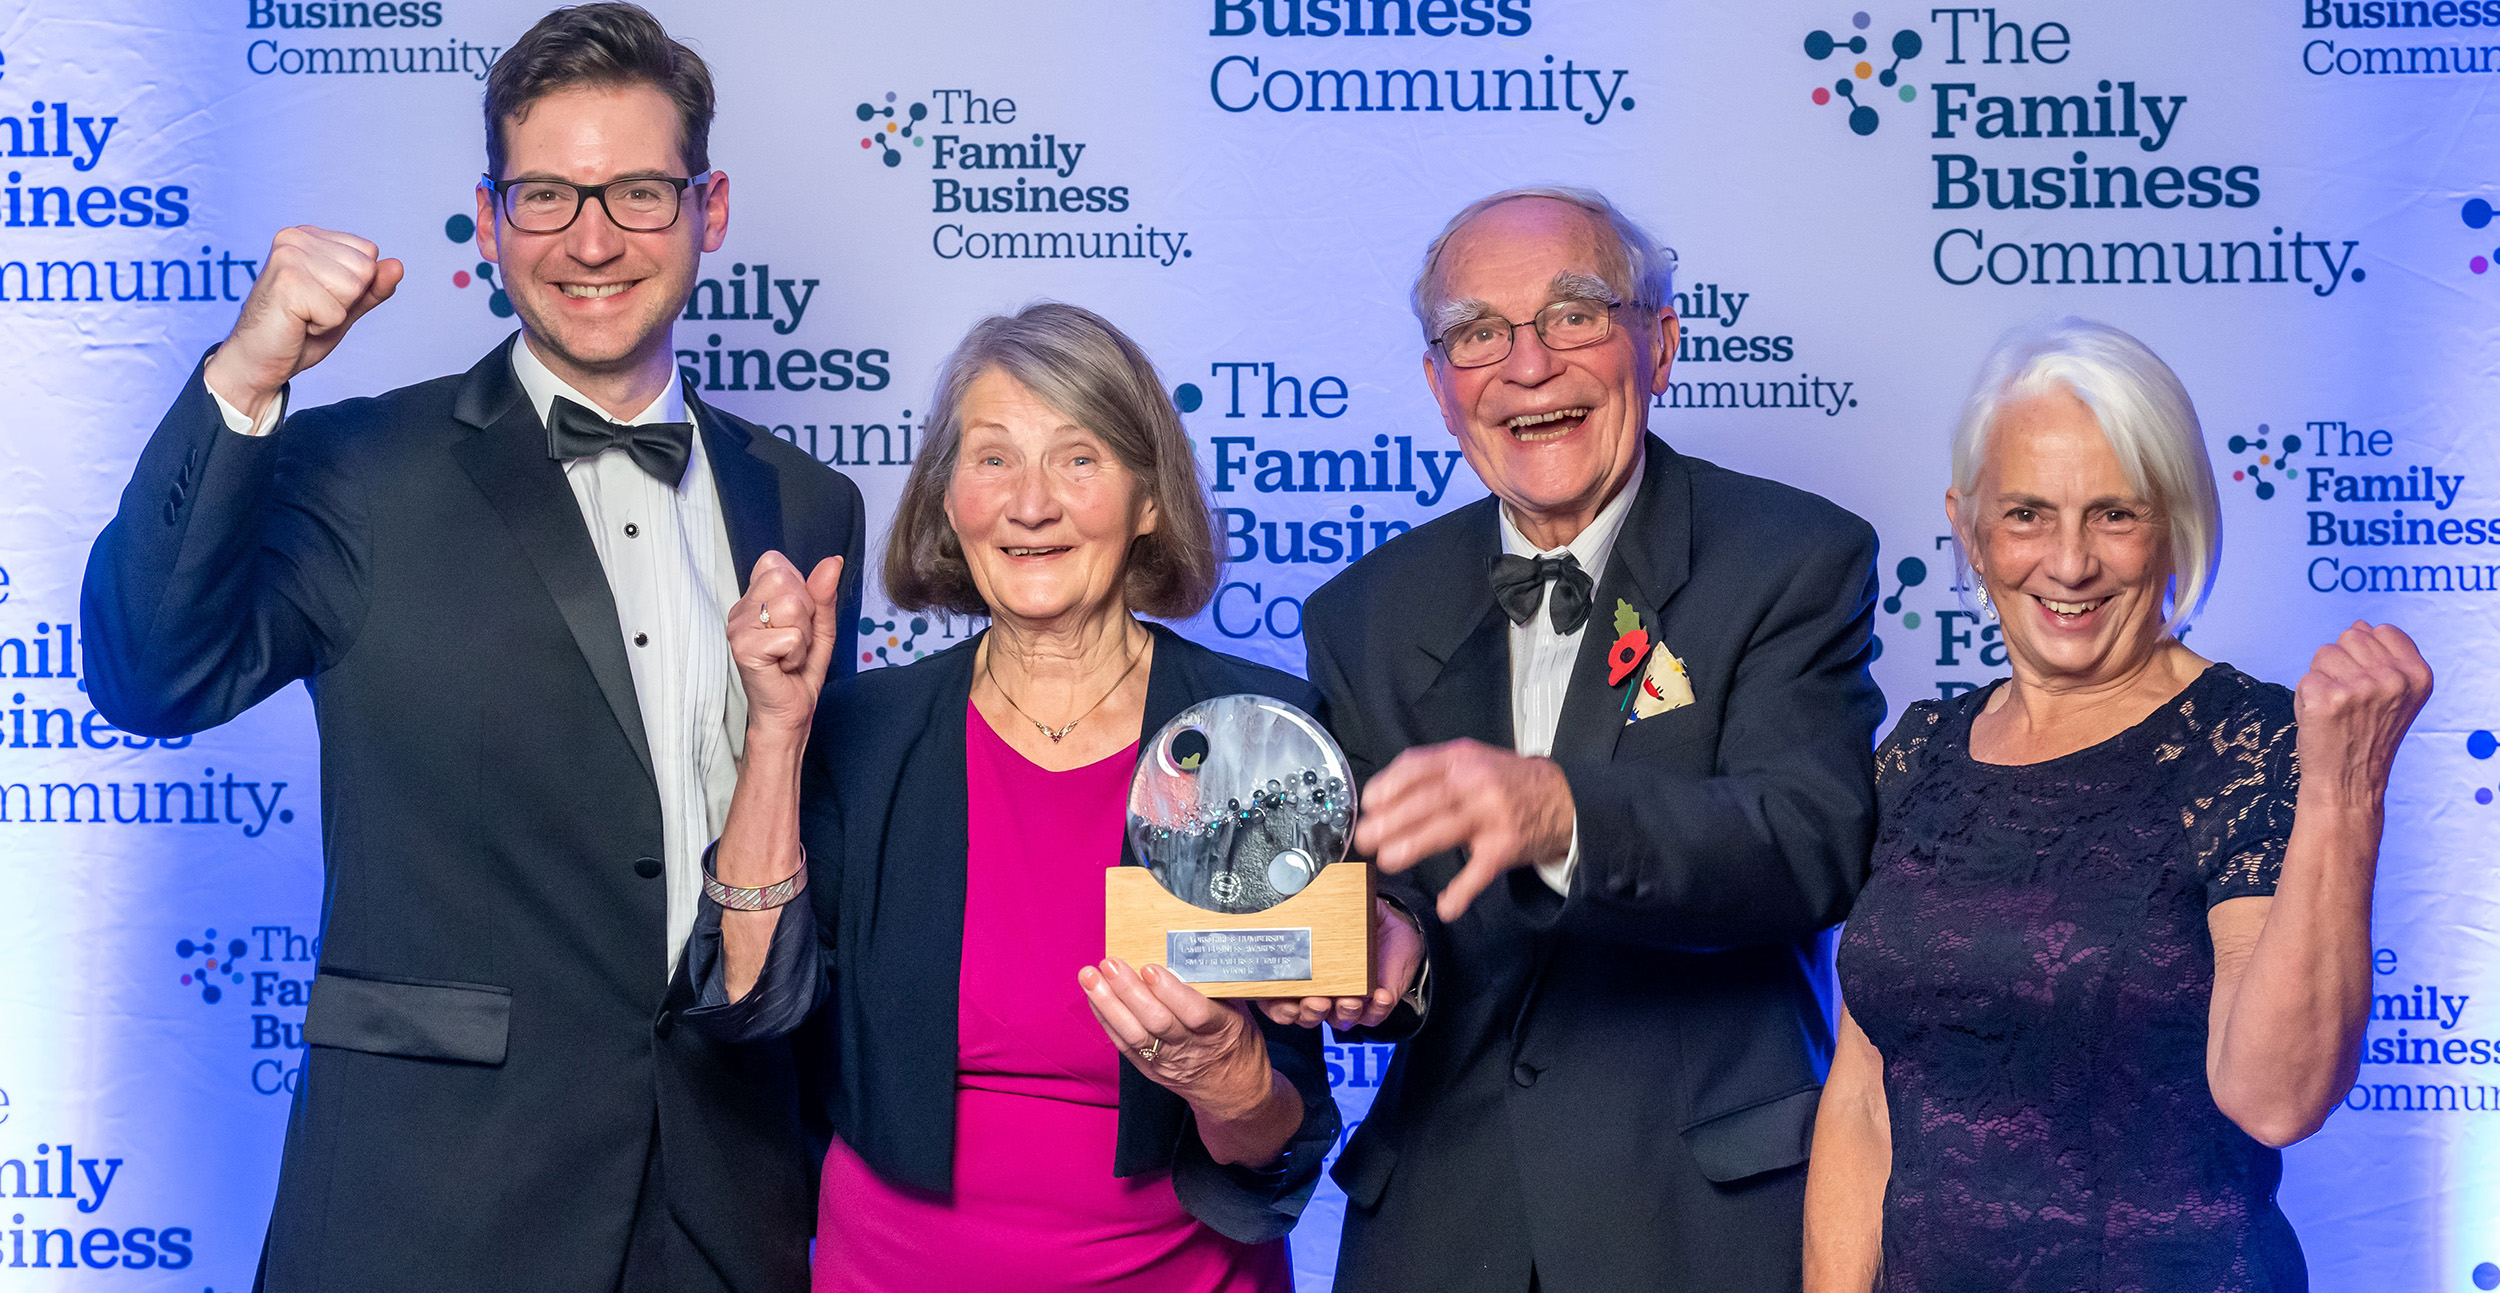 Edward, Justina, Richard and Rose fist pumping the air with the Family Business of the Year Award